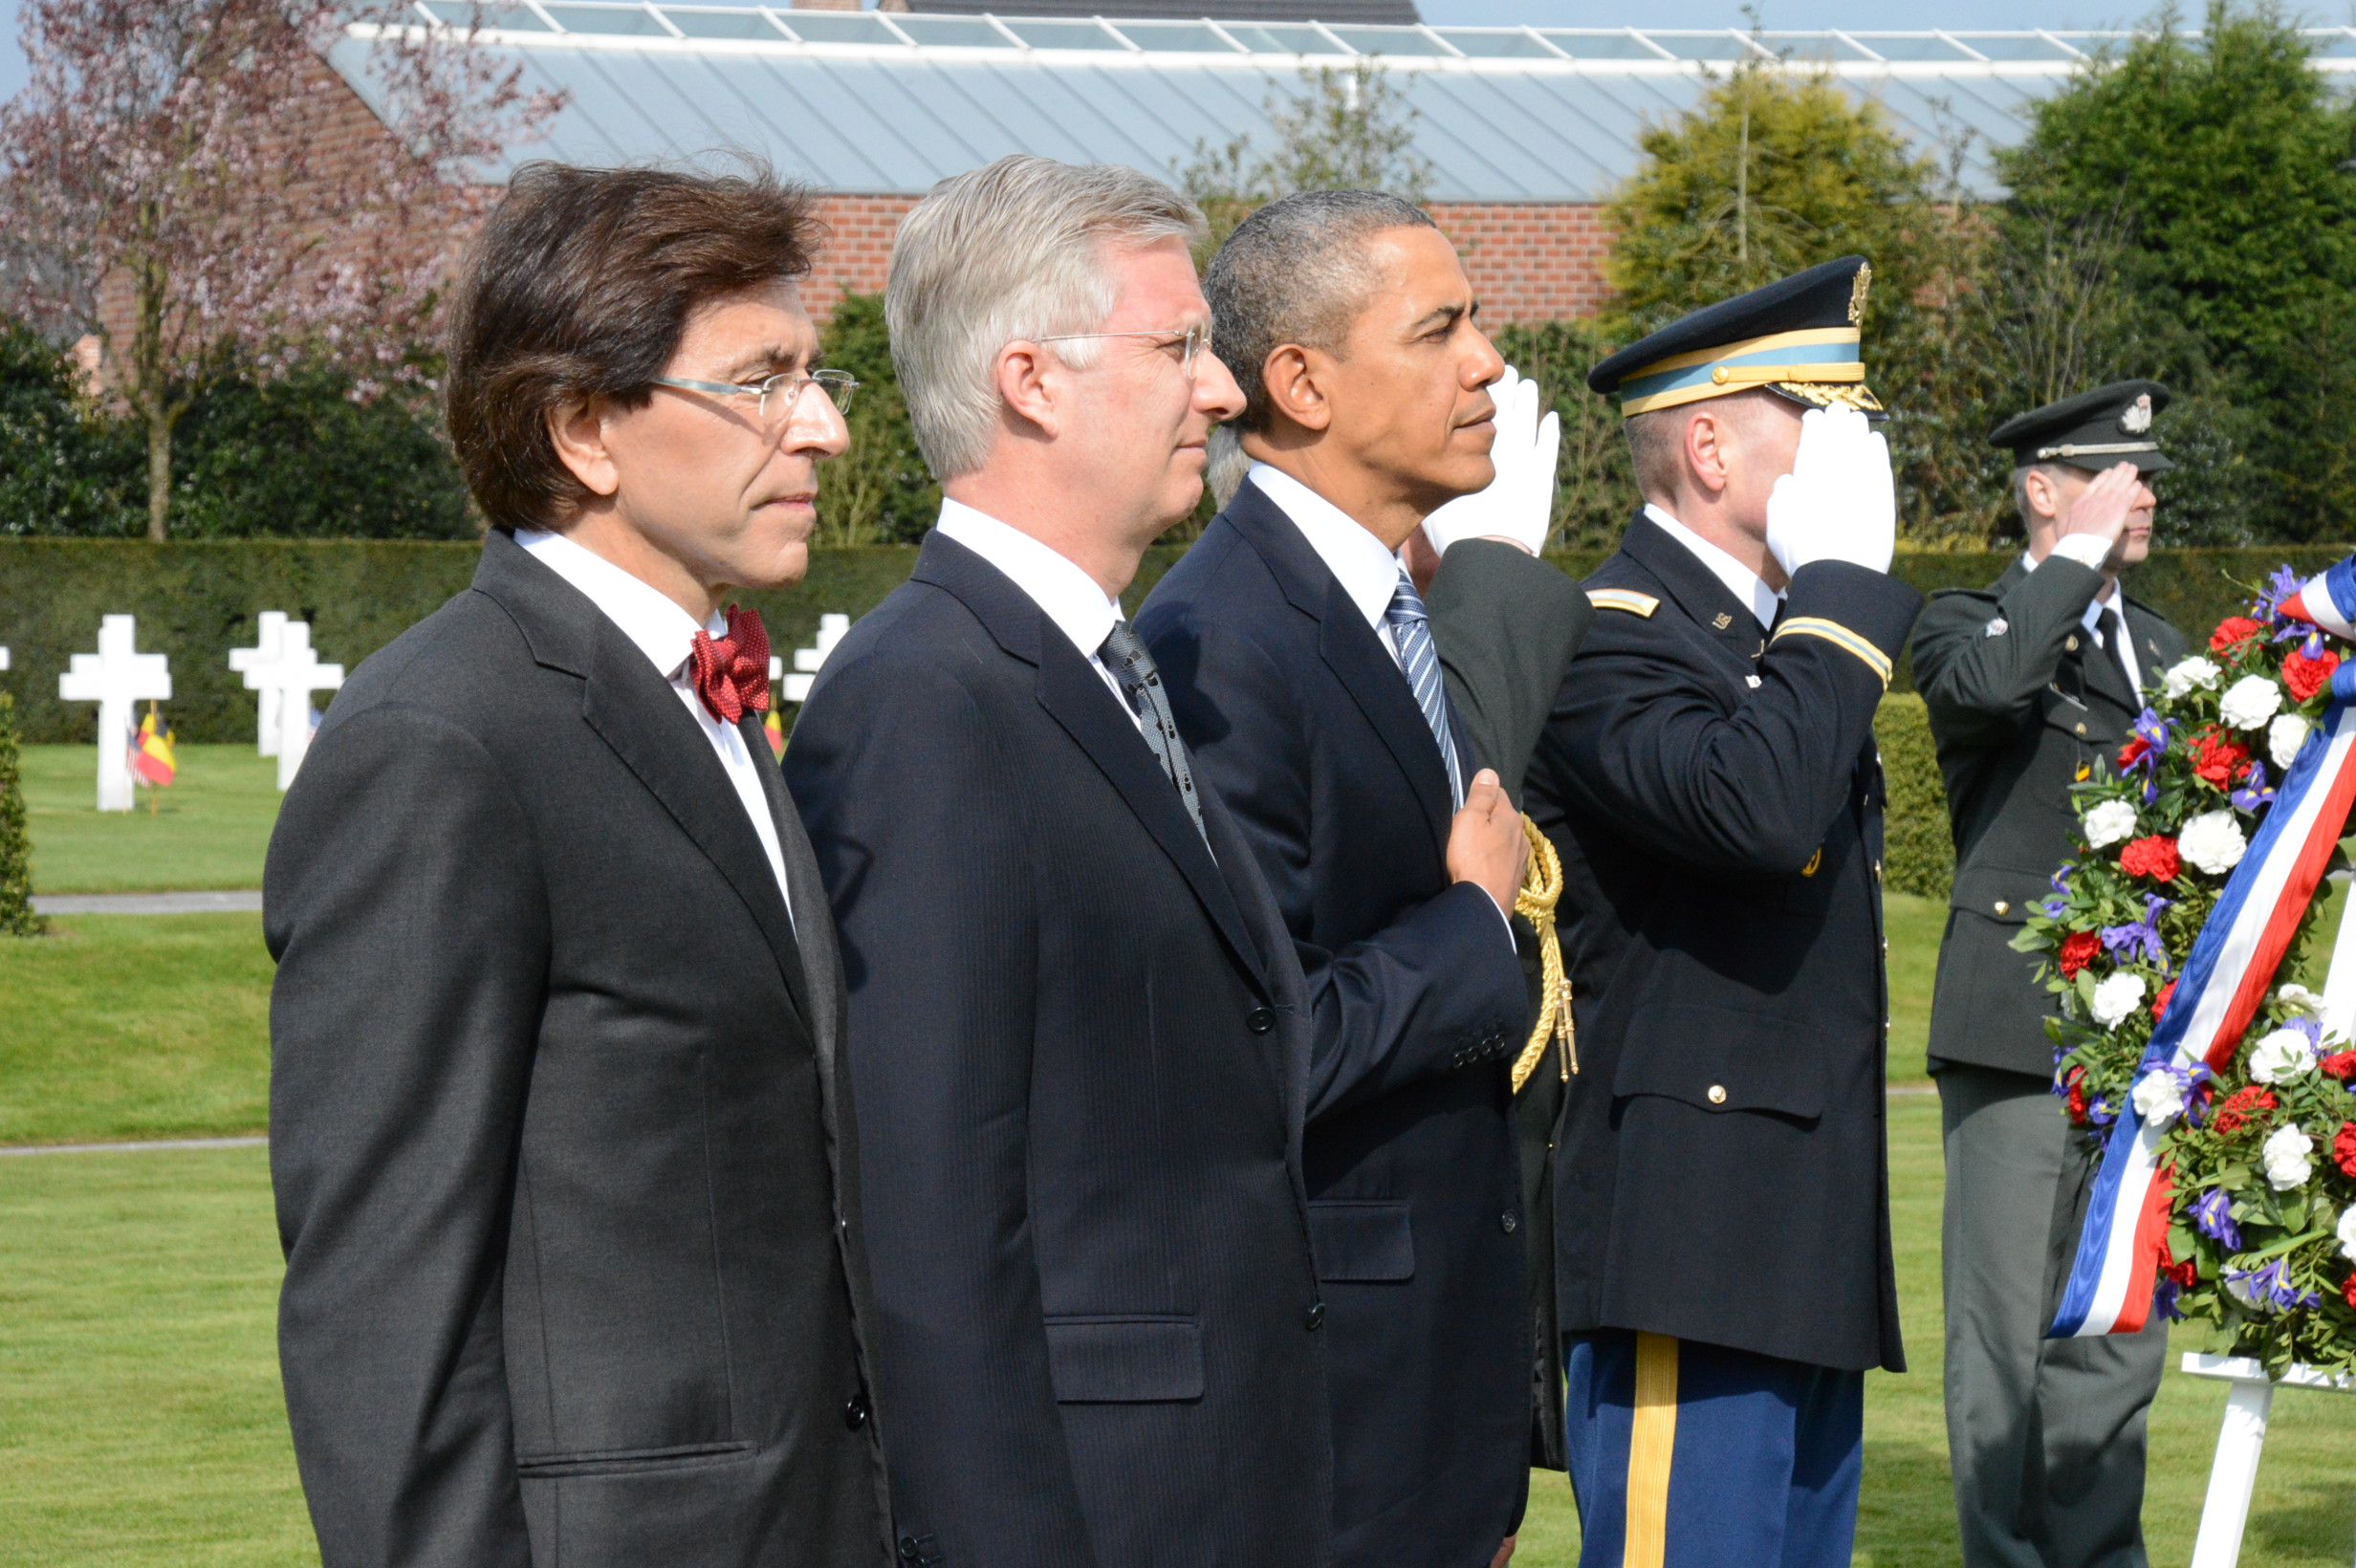 His Majesty the King of Belgium, President Barack Obama and Prime Minister of Belgium, Elio Di Rupo at a ceremony at Flanders Field American Cemetery in 2014. Credits: U.S. Embassy photographer Serge Vandendriessche